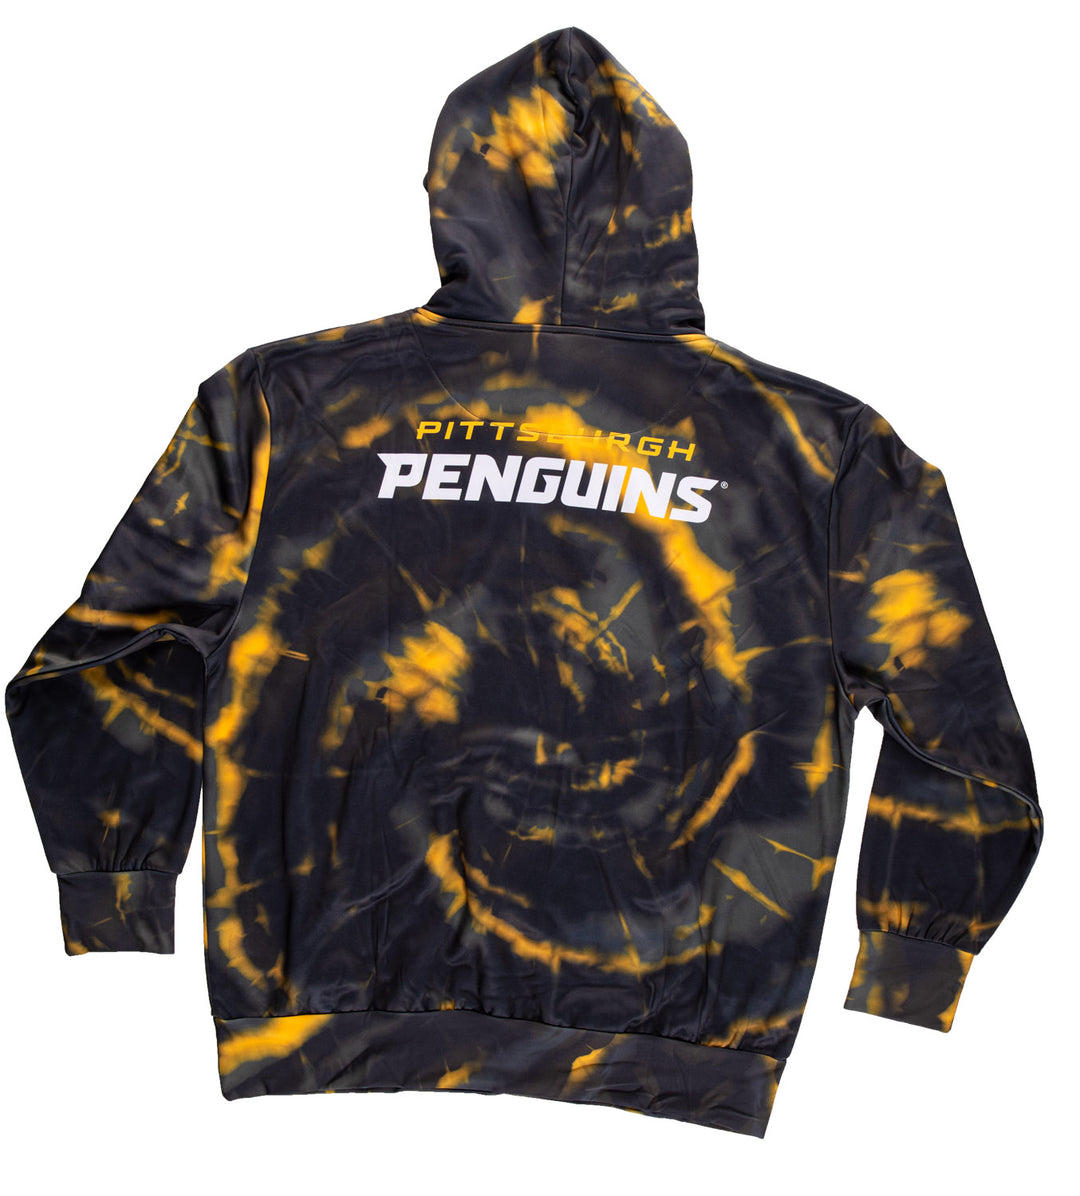 Official NHL Licensed Pittsburgh Penguins Tie Dye Sublimation Hoodie